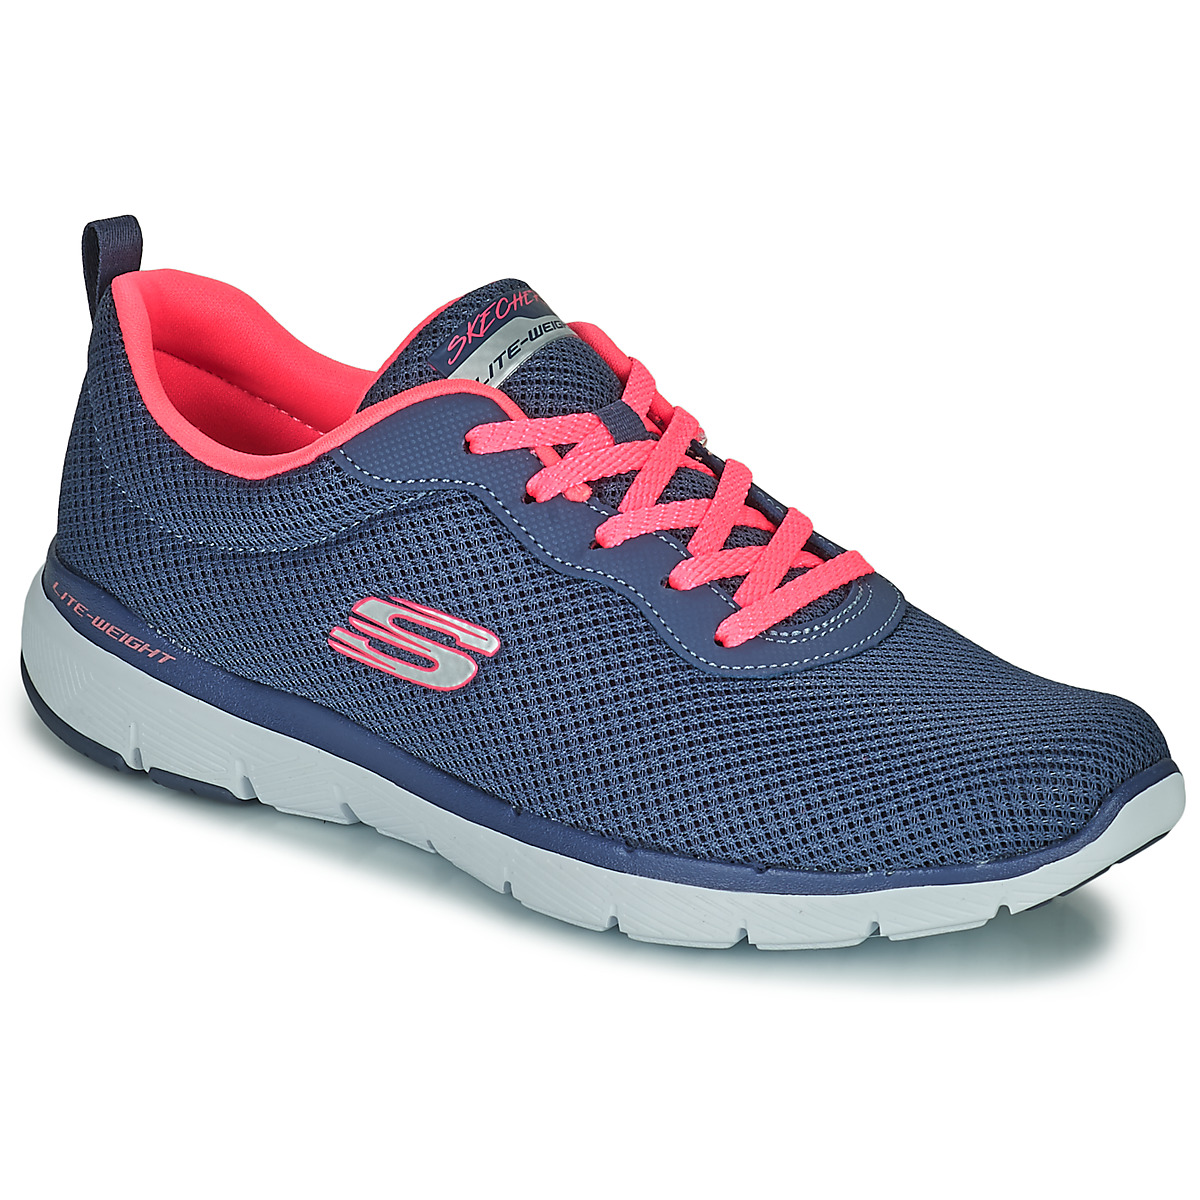 Shoes Women Low top trainers Skechers FLEX APPEAL 3.0 FIRST INSIGHT Blue / Pink